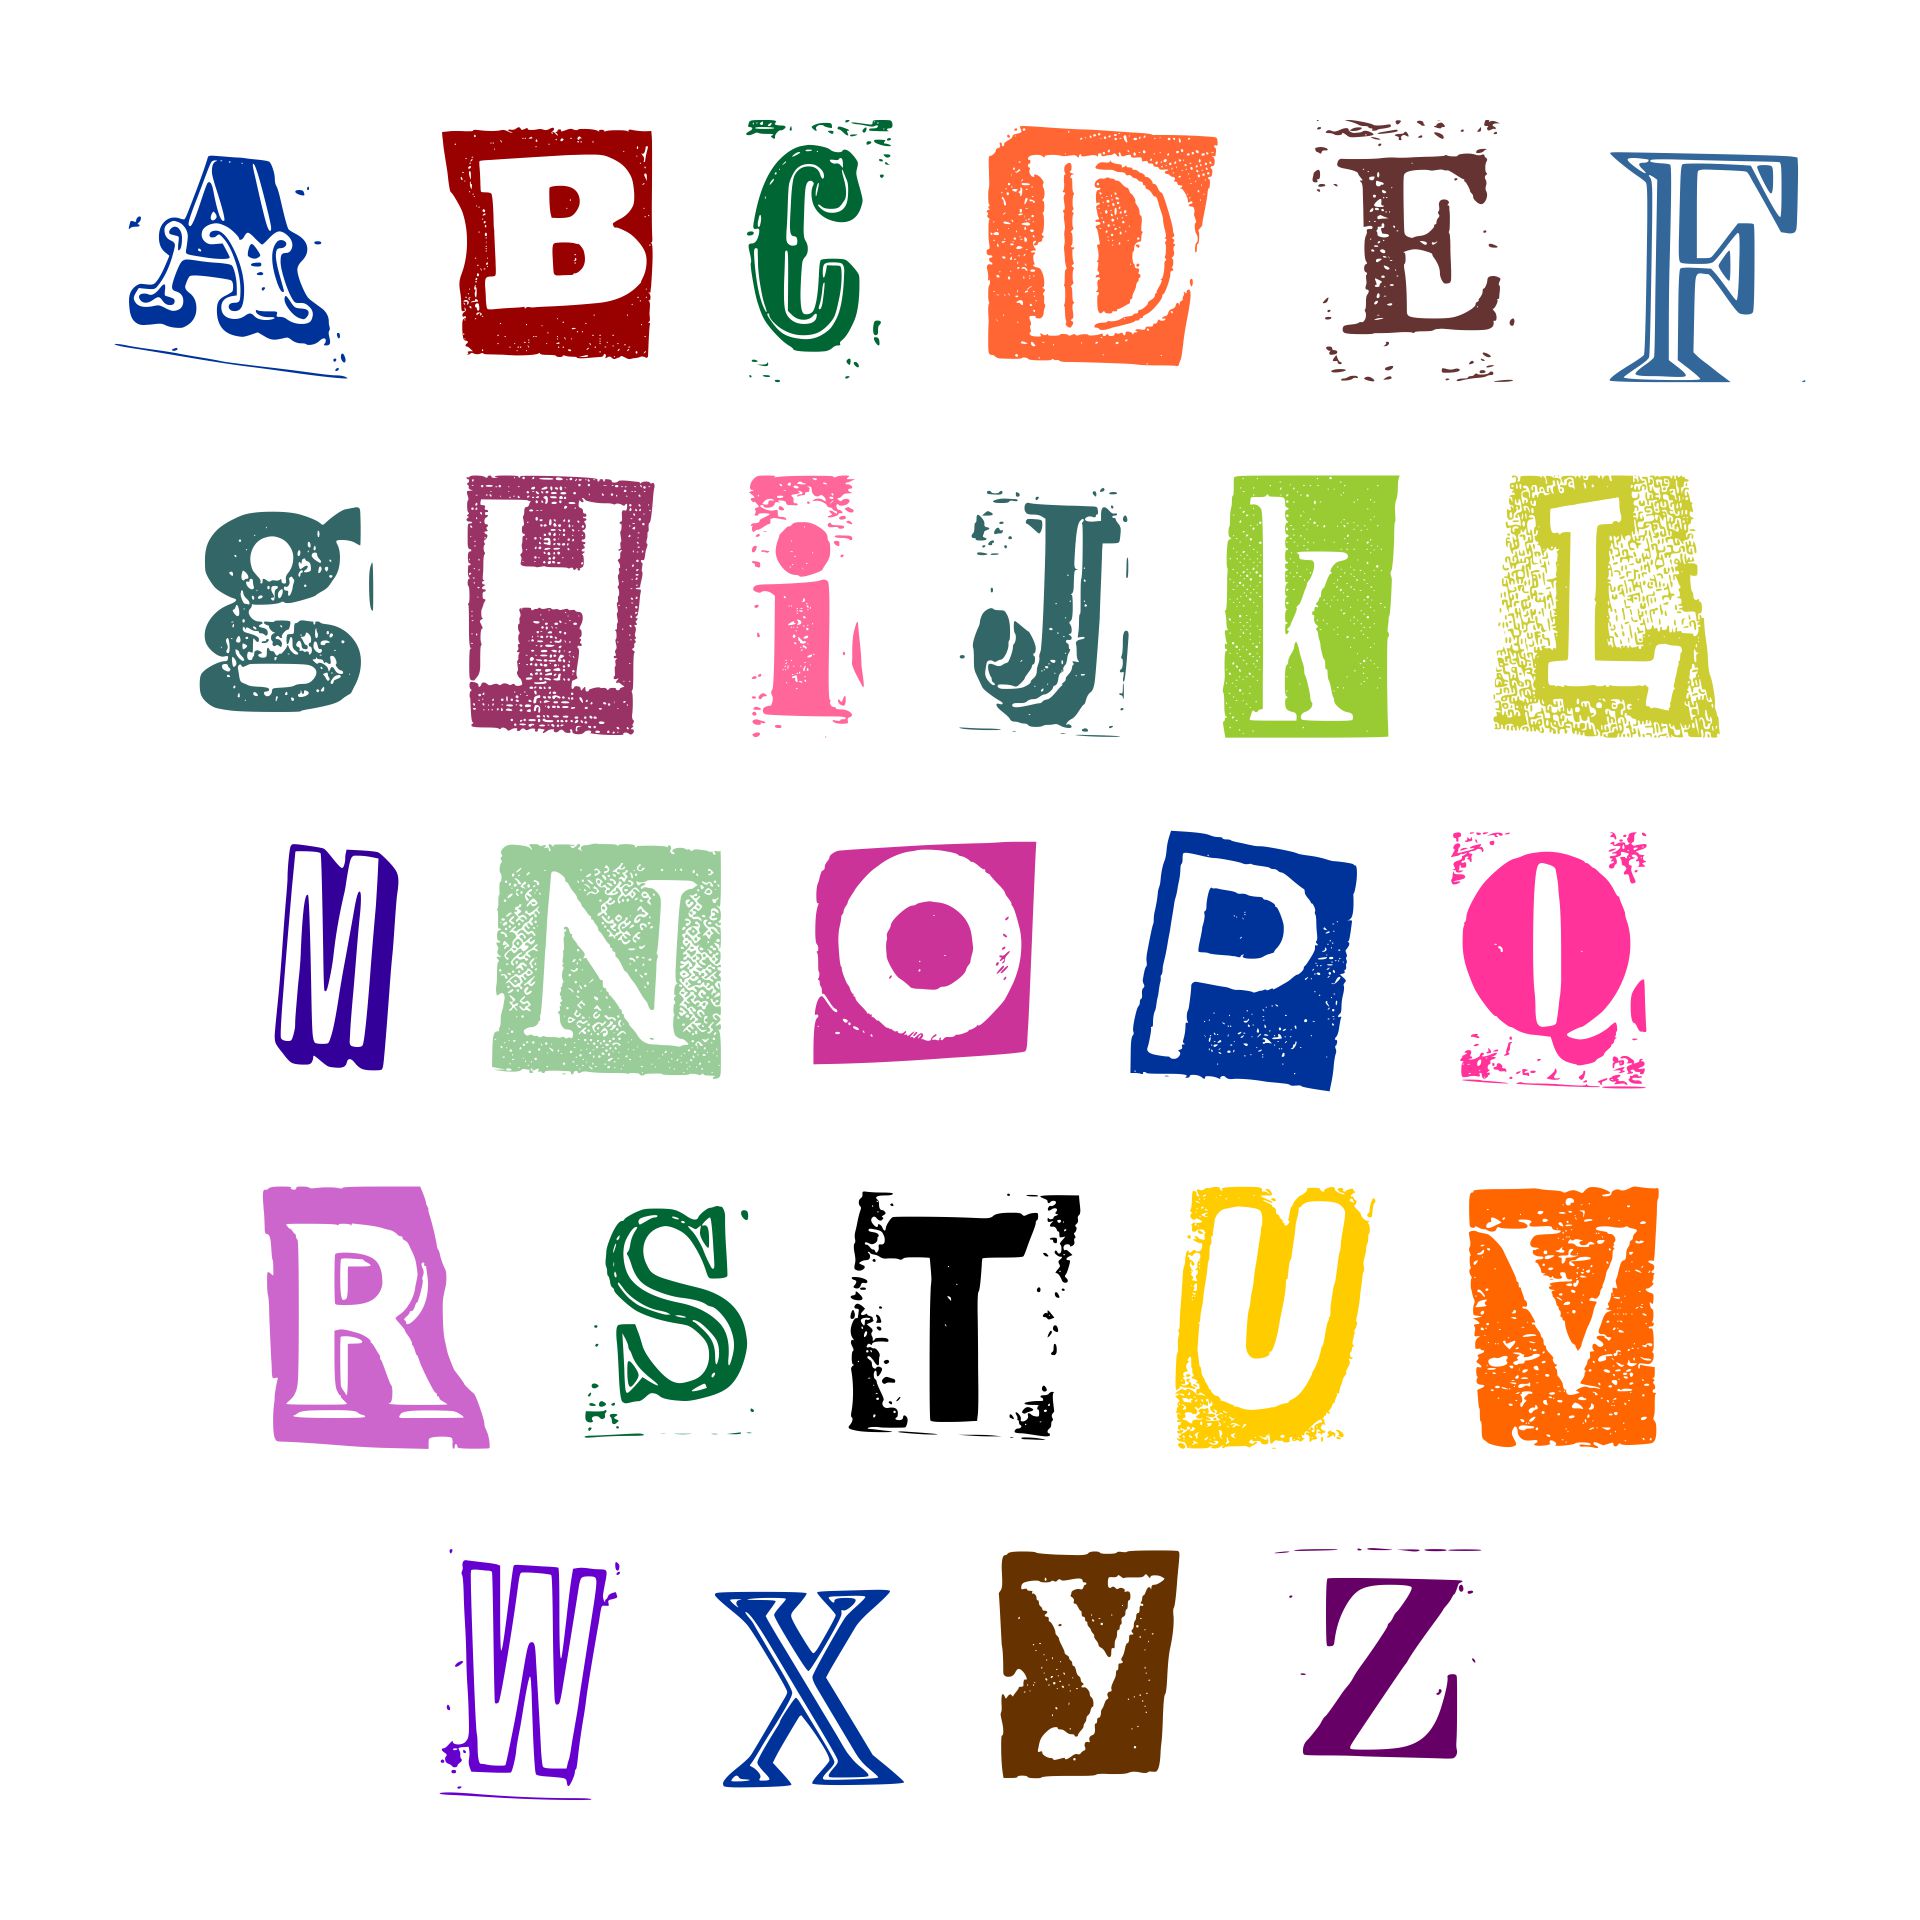 printable-letters-cut-out-free-alphabet-letter-templates-to-print-and